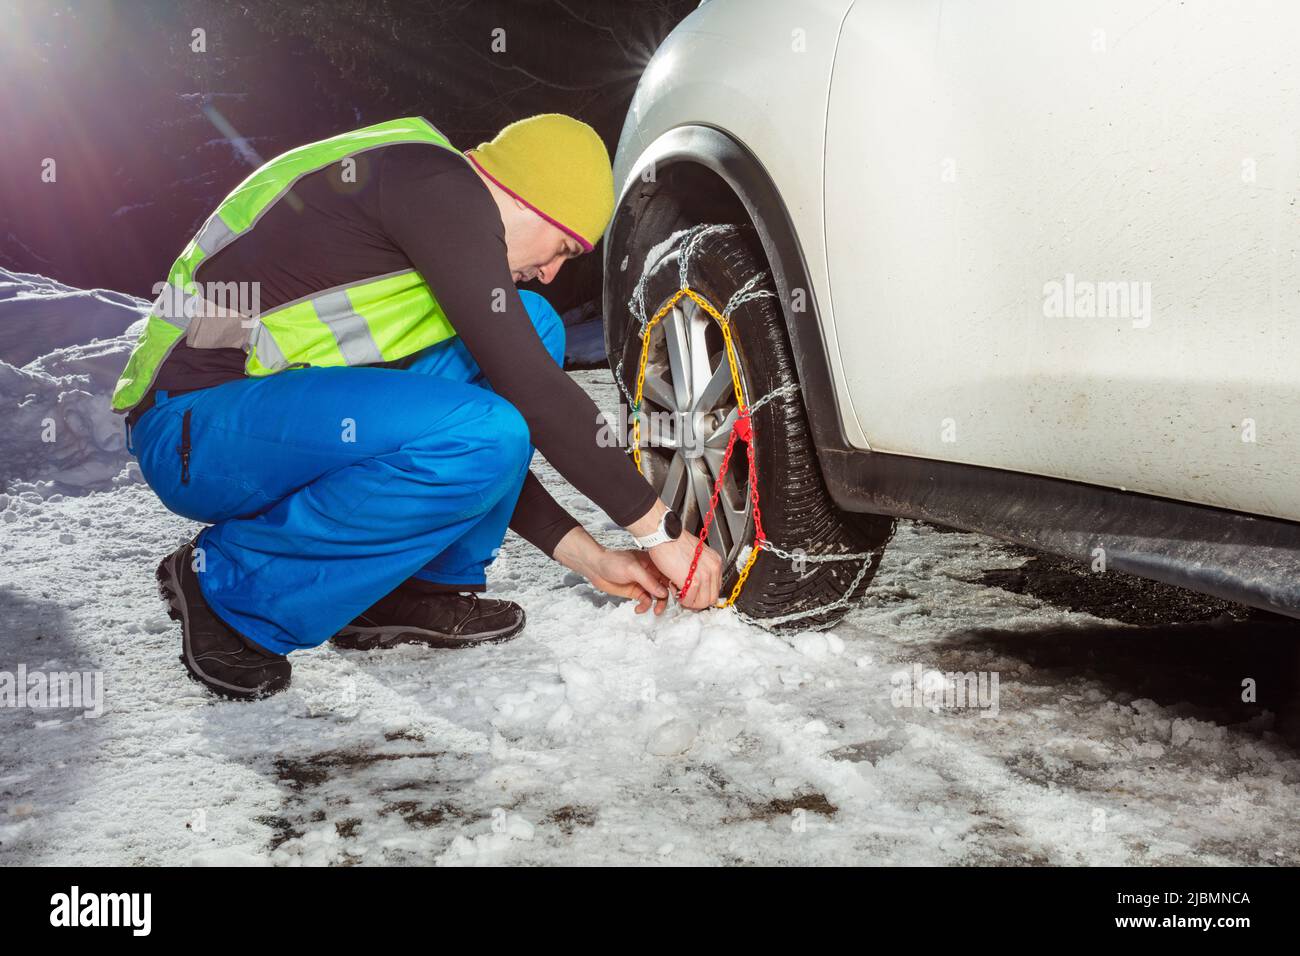 Man put on winter chains for car wheel at snowy road Stock Photo